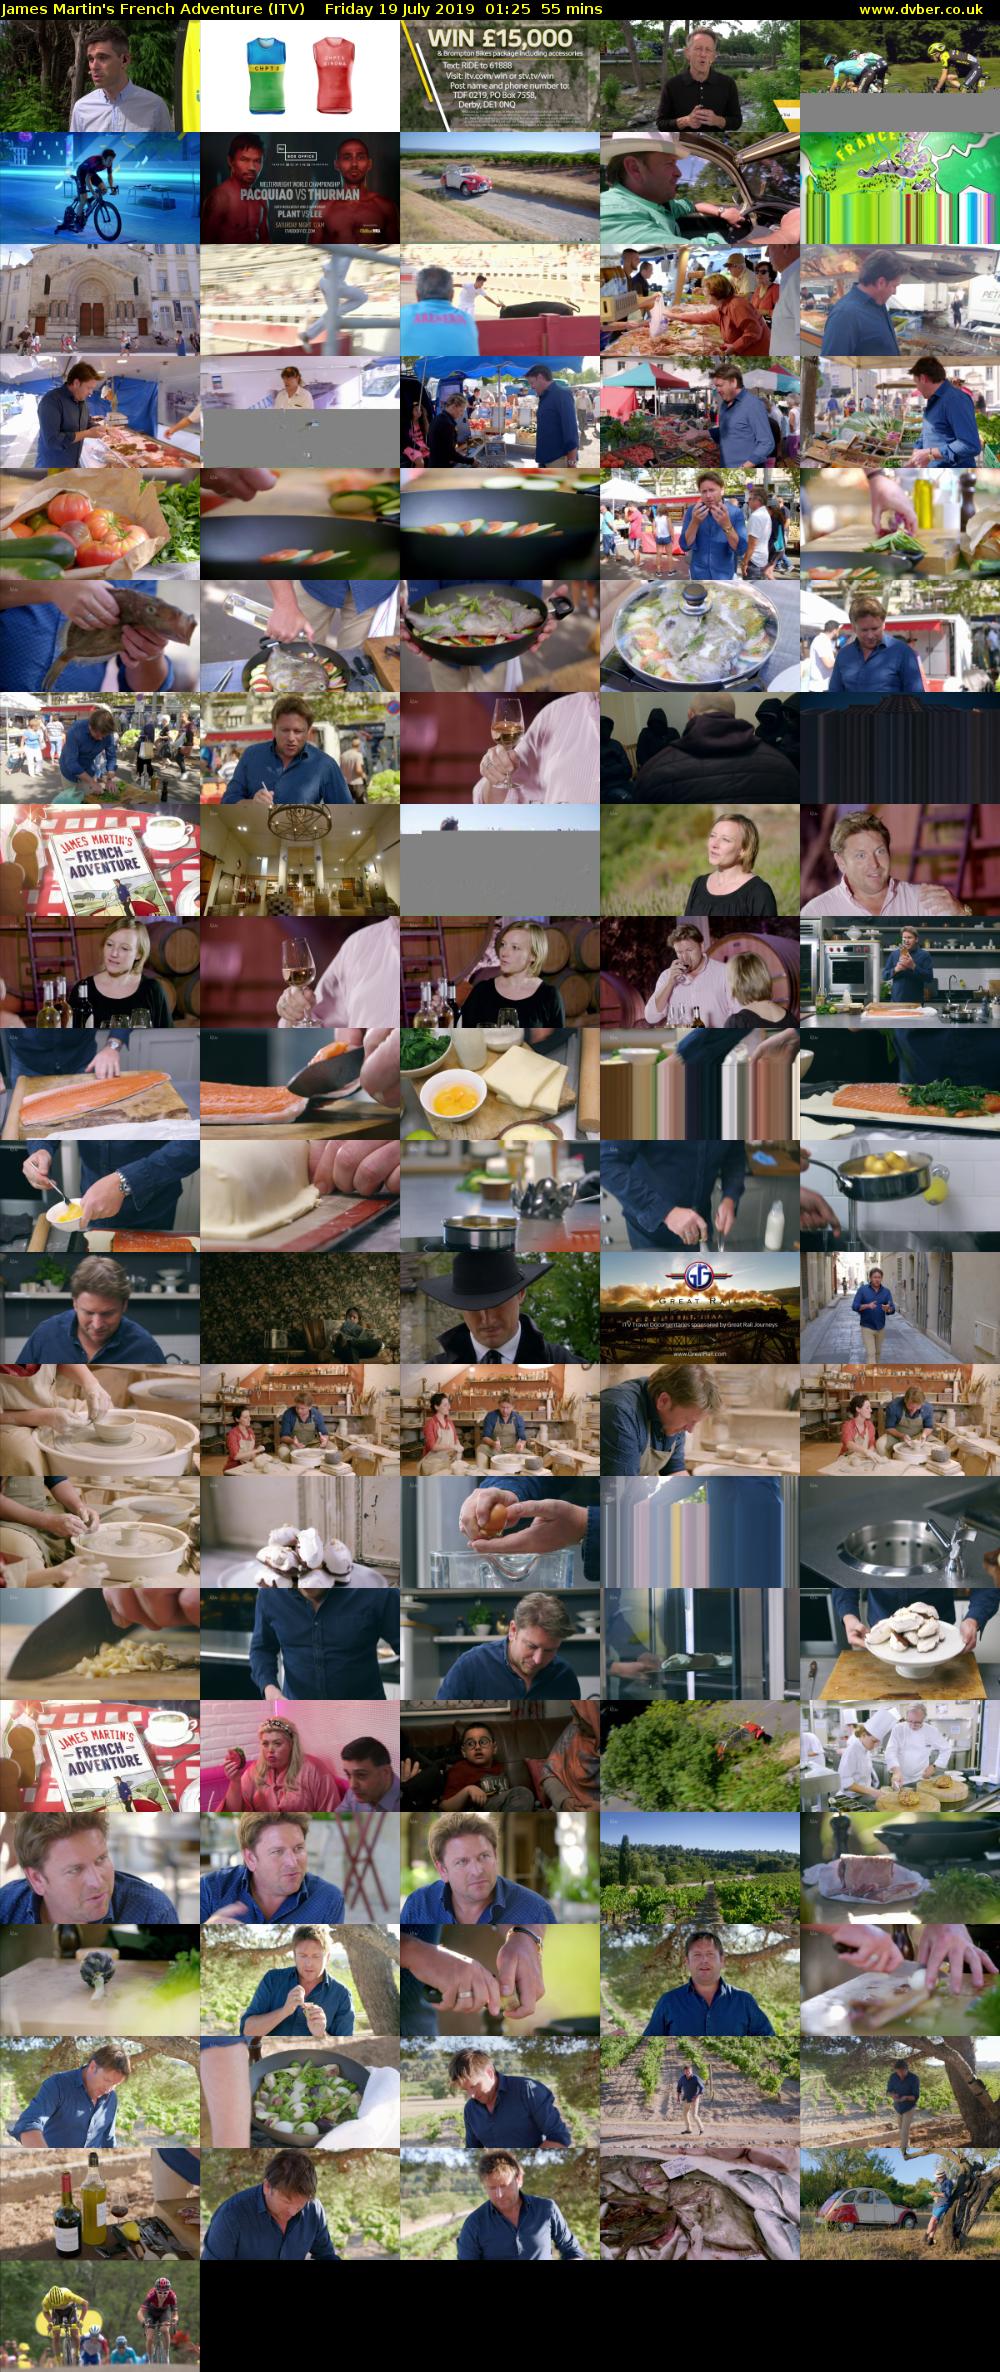 James Martin's French Adventure (ITV) Friday 19 July 2019 01:25 - 02:20